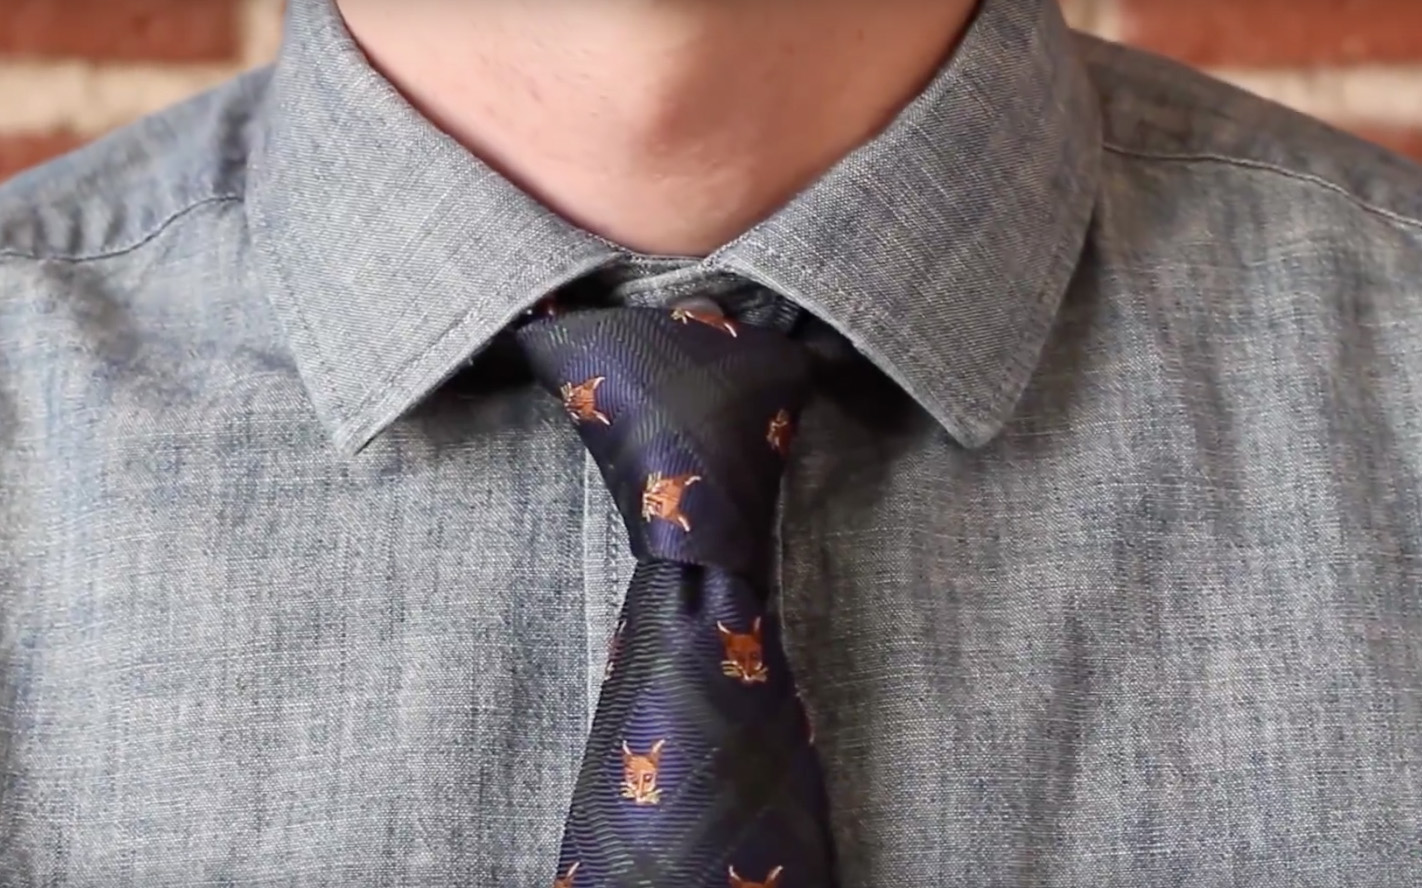 Style tips #25: Tying the knot once you’ve found your perfect tie